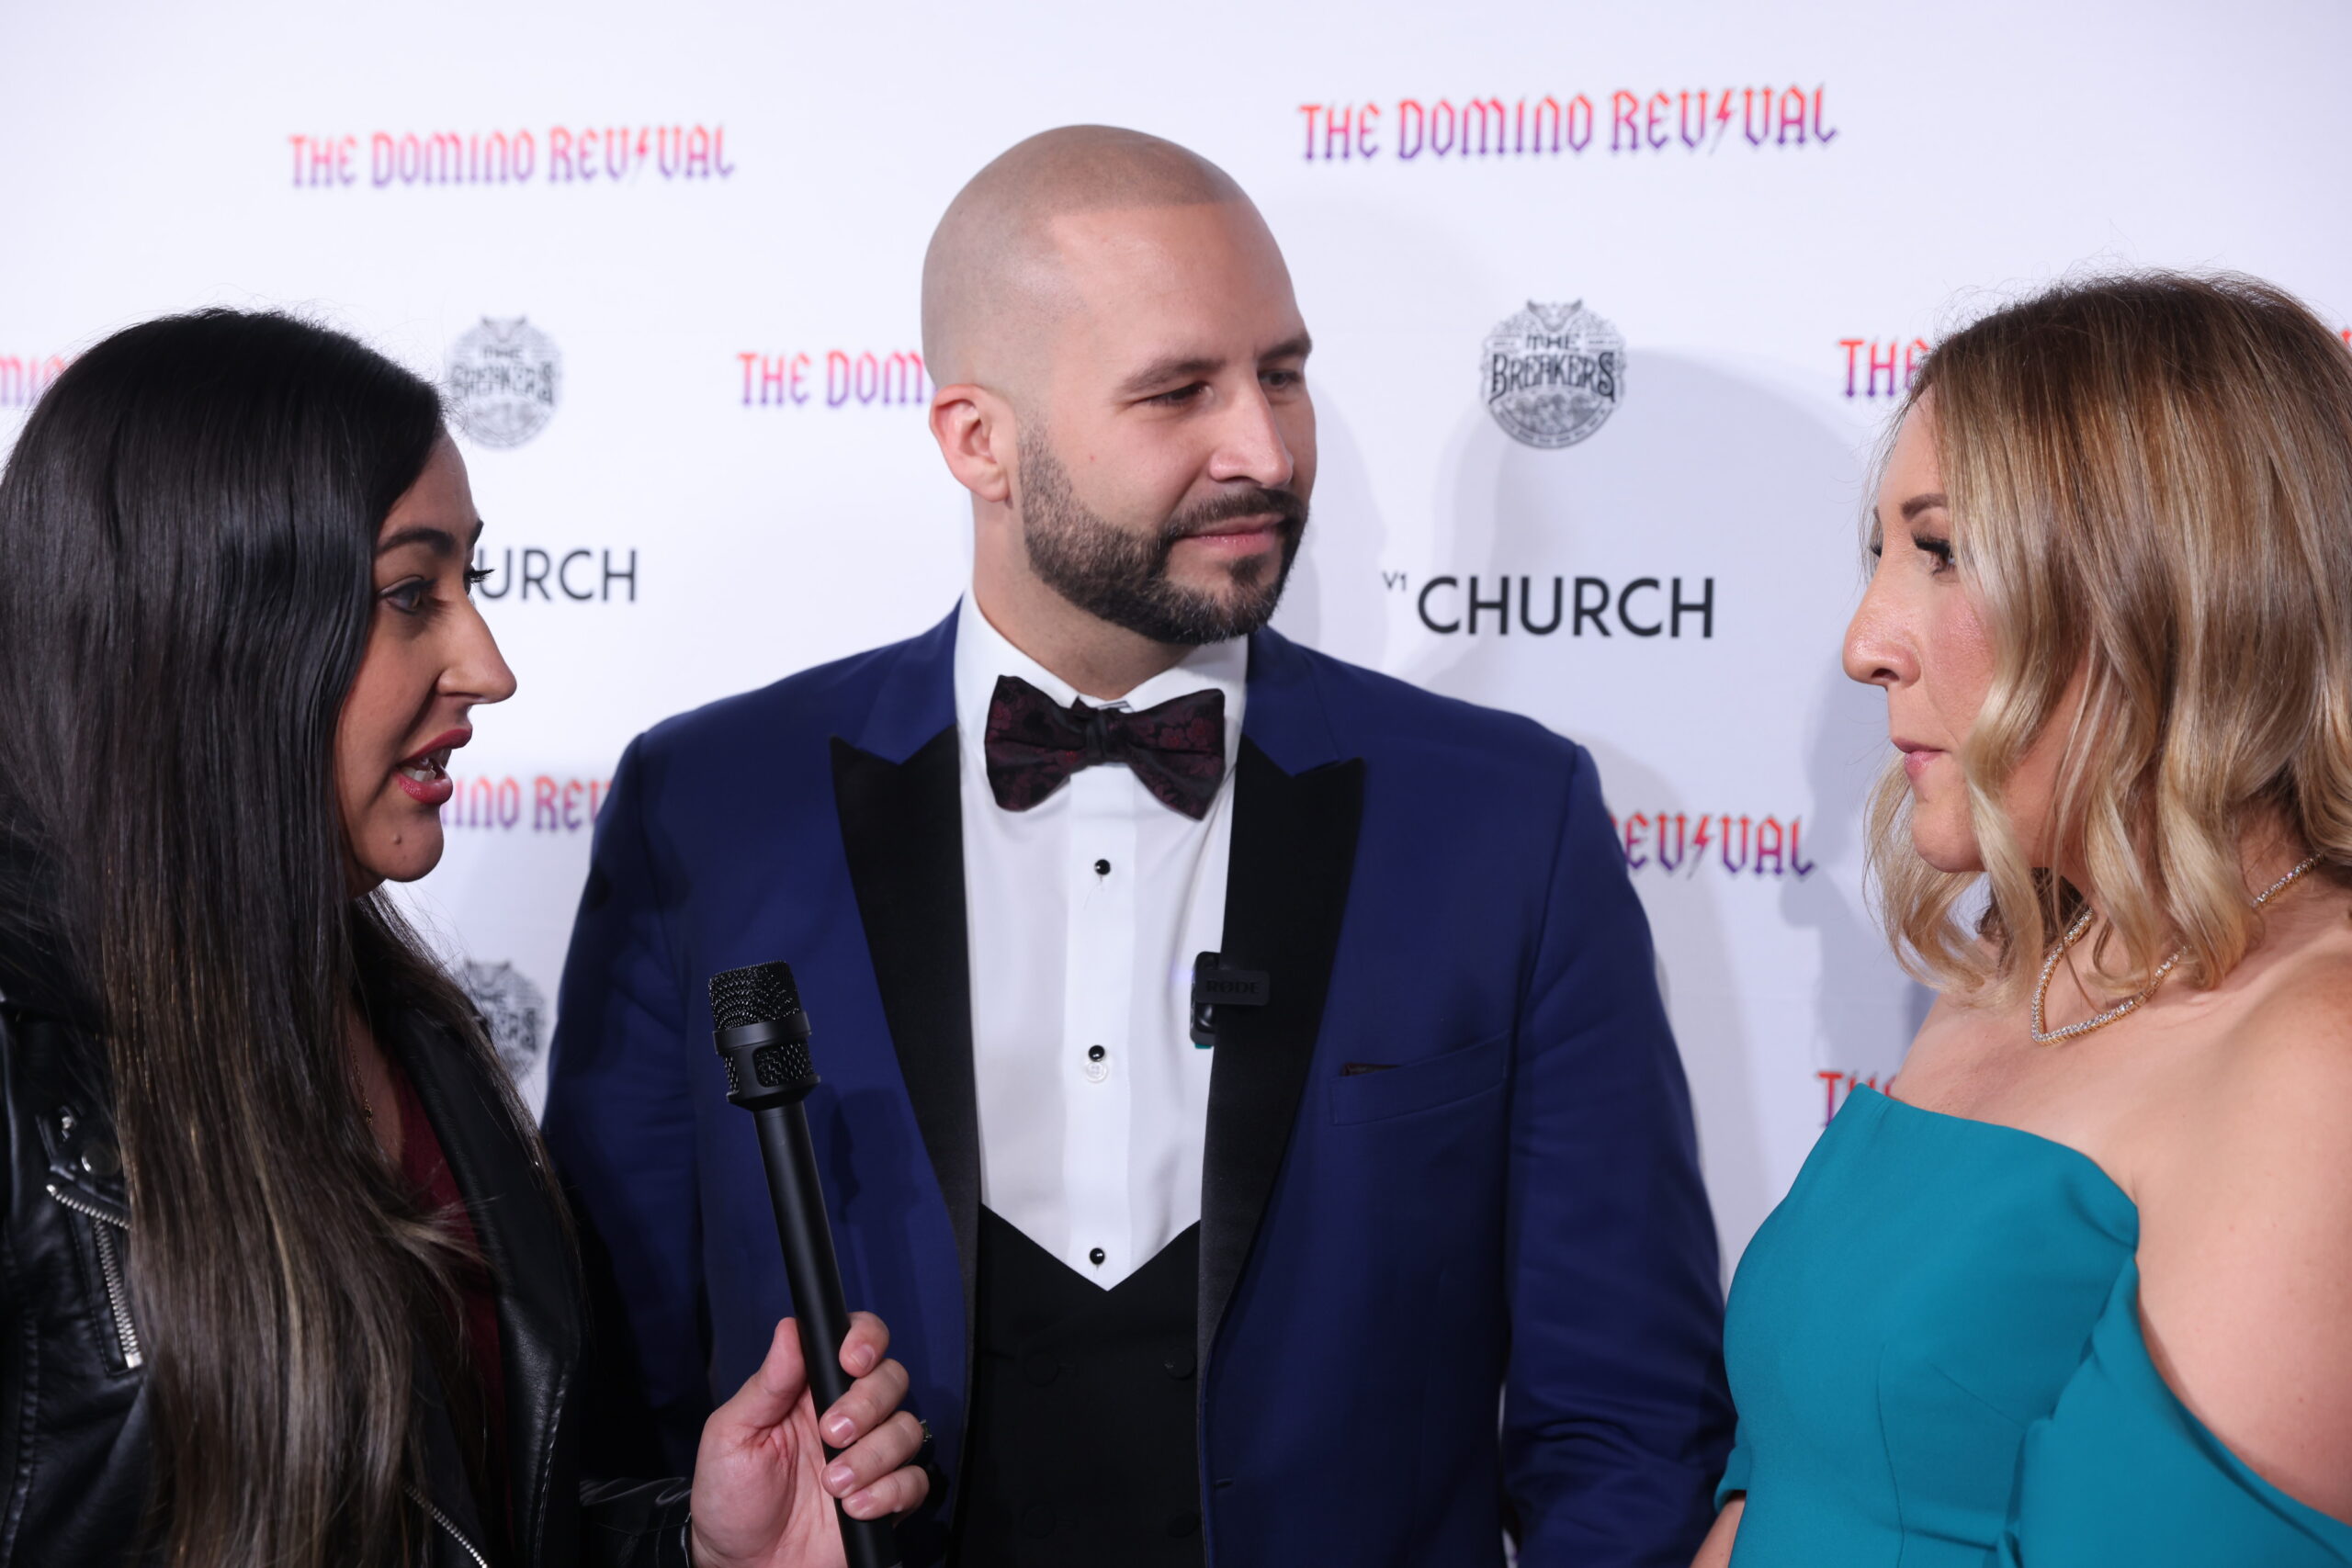 Pastor Mike and Julie Signorelli on the Domino Revival red carpet